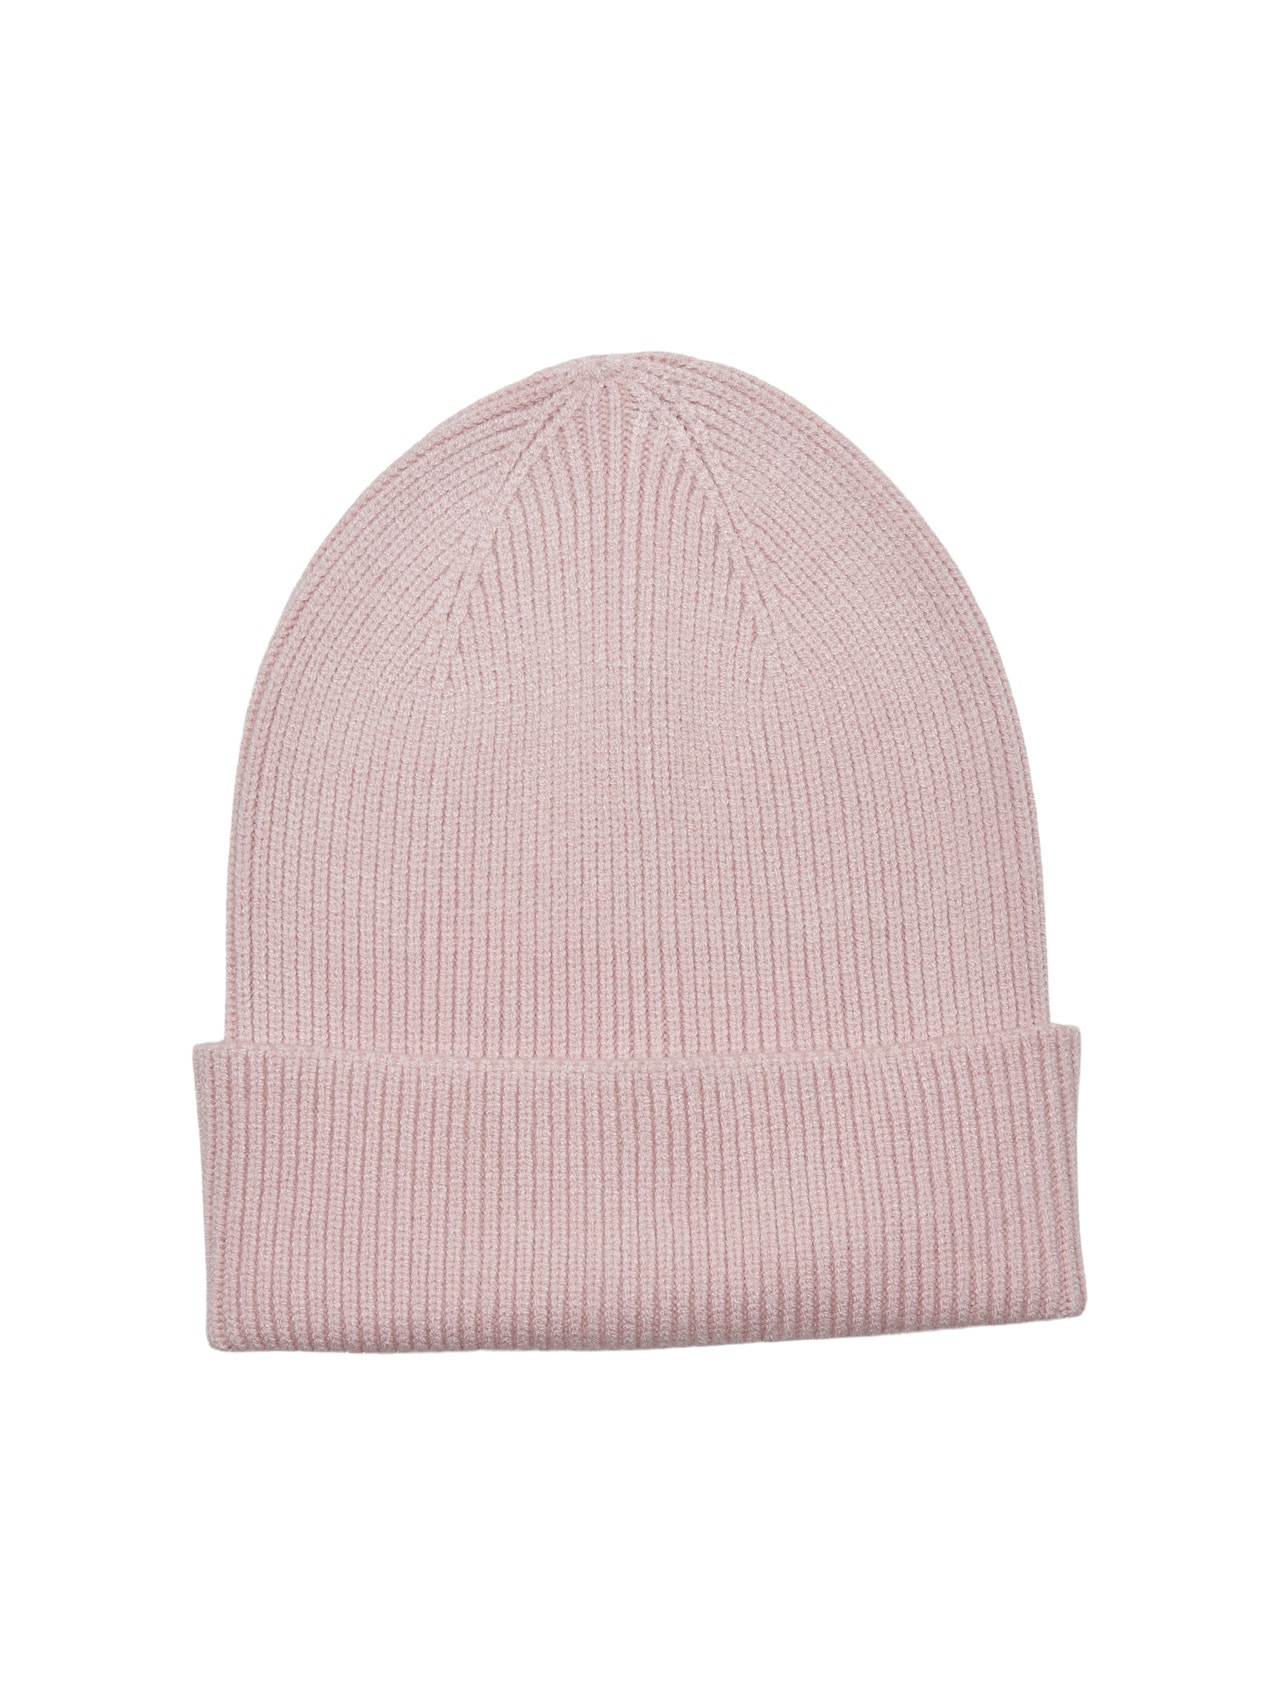 ONLY Rib knitted beanie -Rose Smoke - 15274342